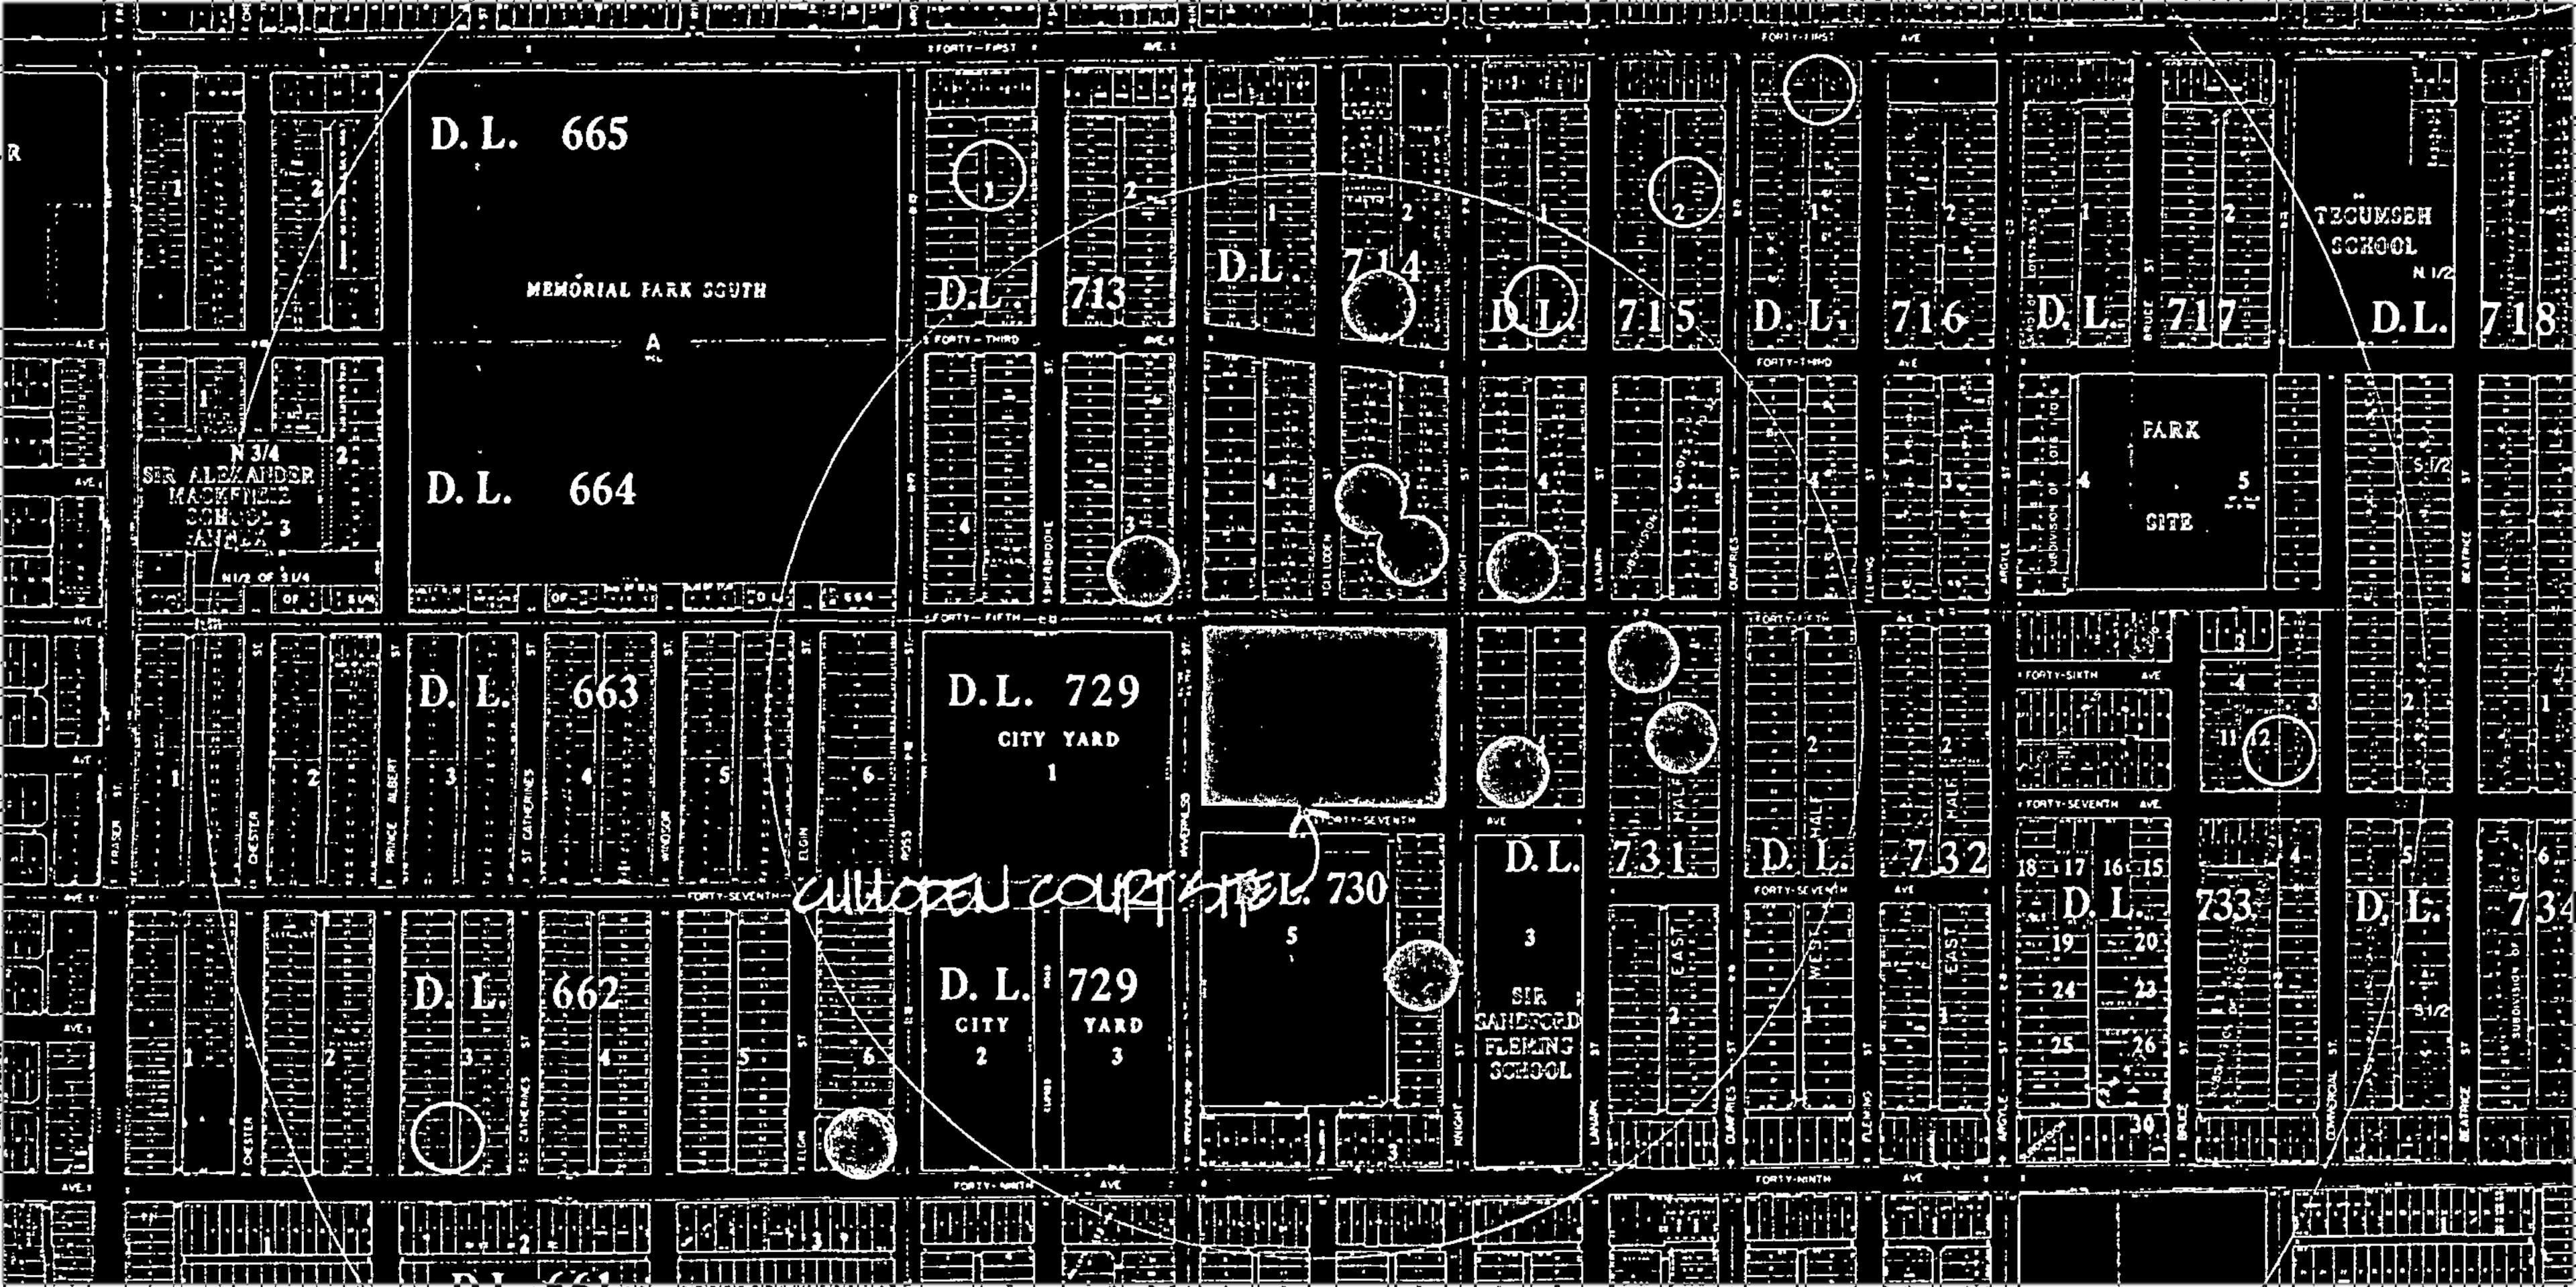 An image, with a black background and white text and lines showing a section of an architectural plan for a neighbourhood. Handwritten text in the centre reads “CULLODEN COURT SHEL.”